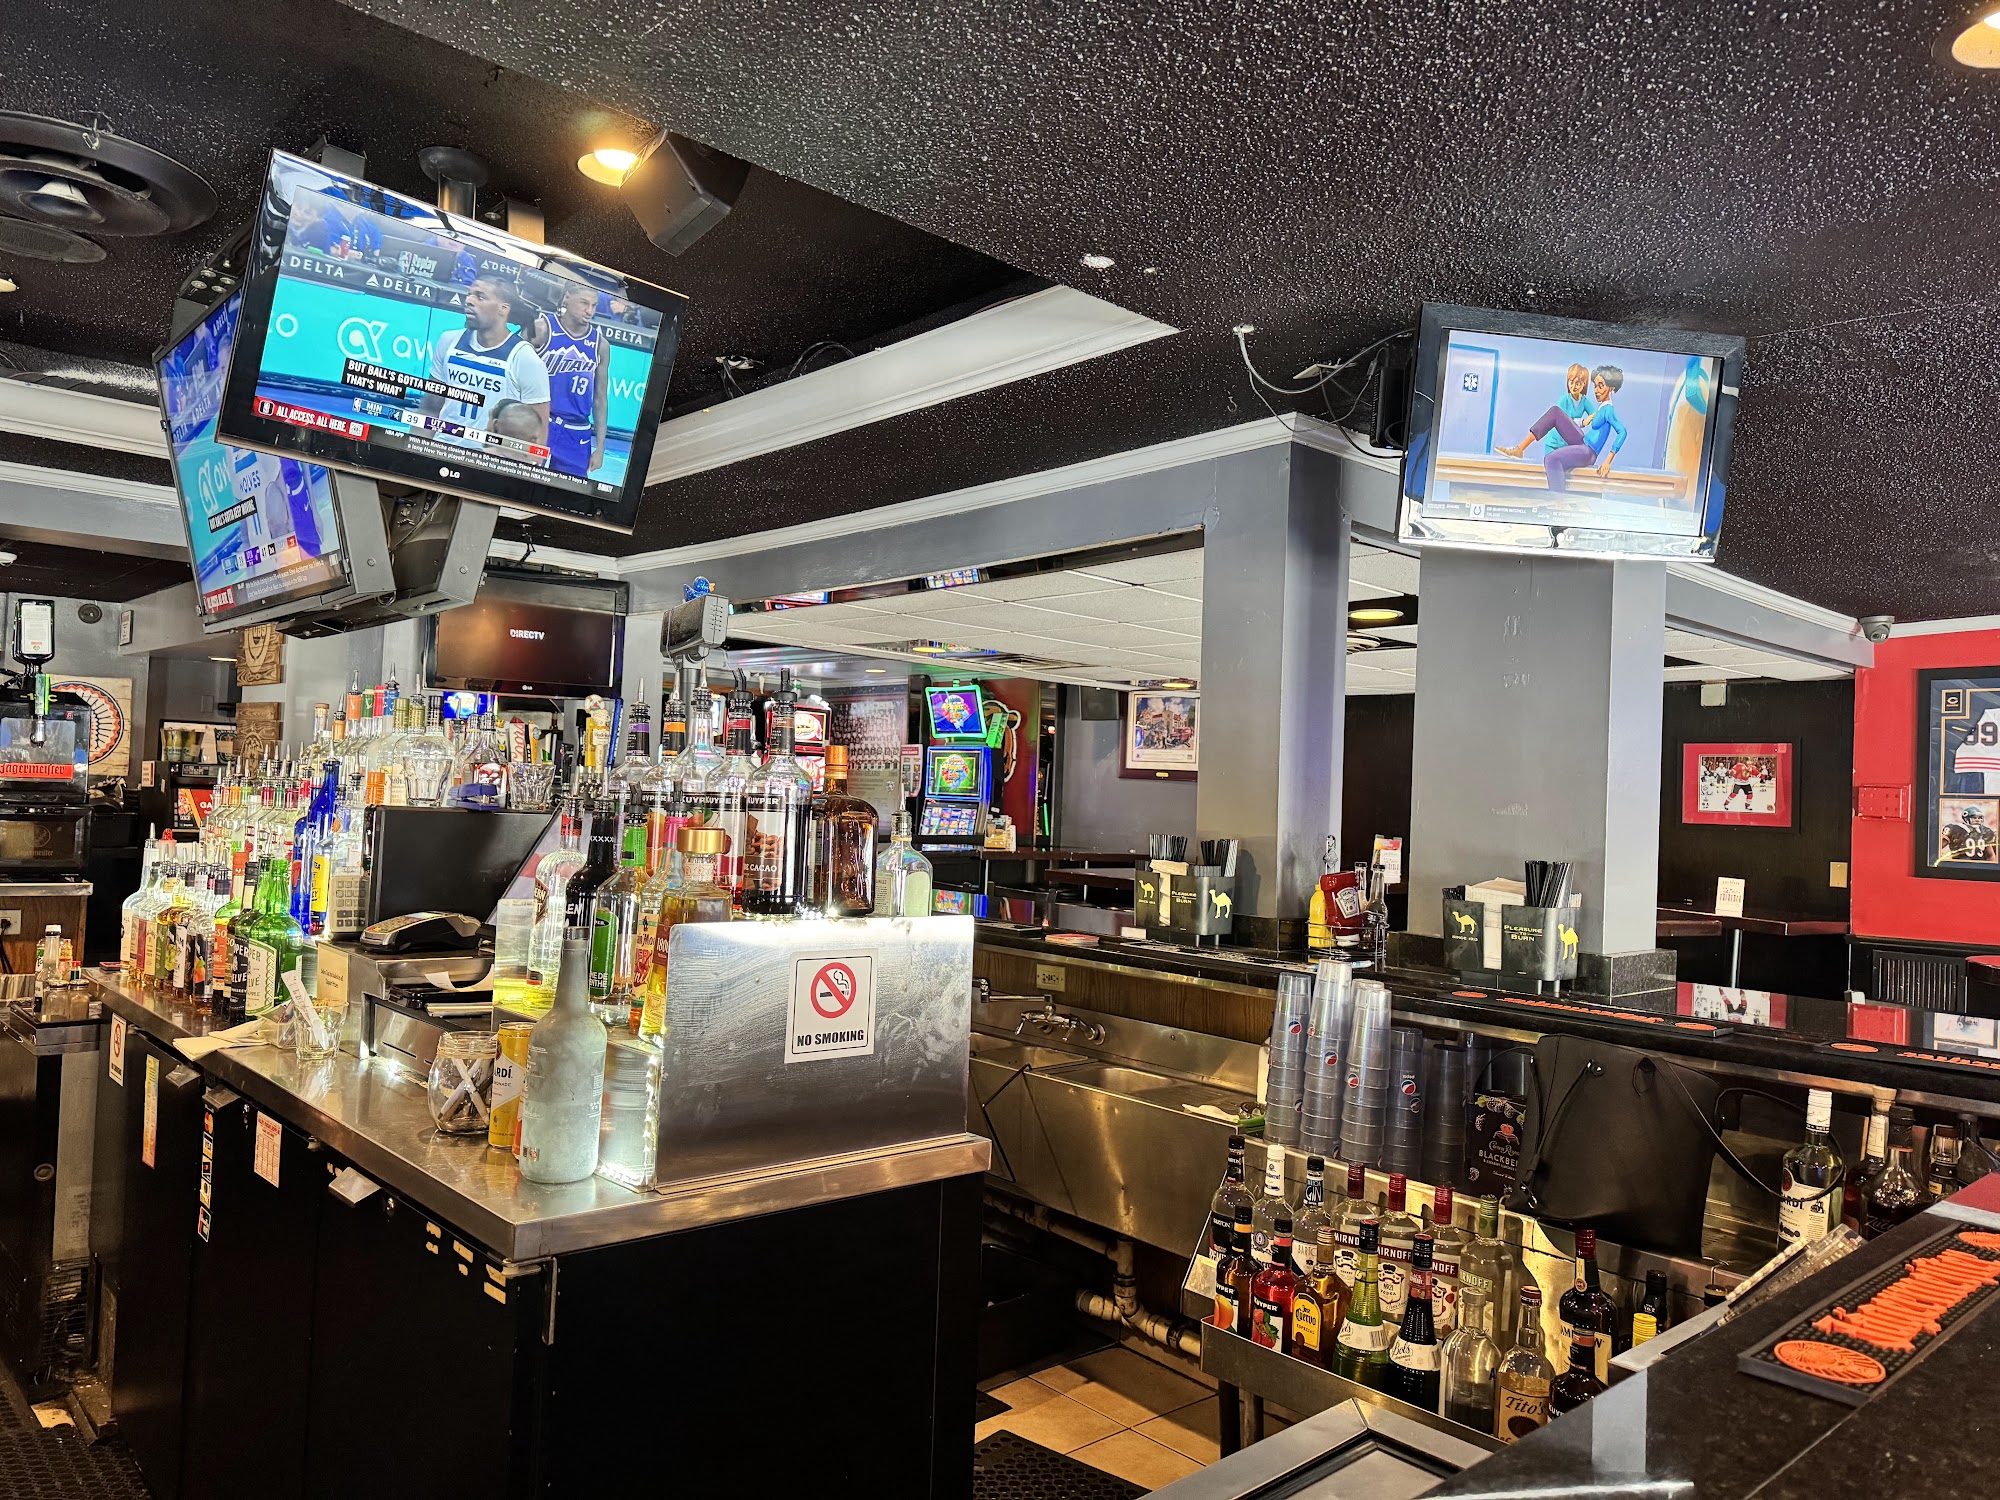 Sneaker's Sports Bar and Grill